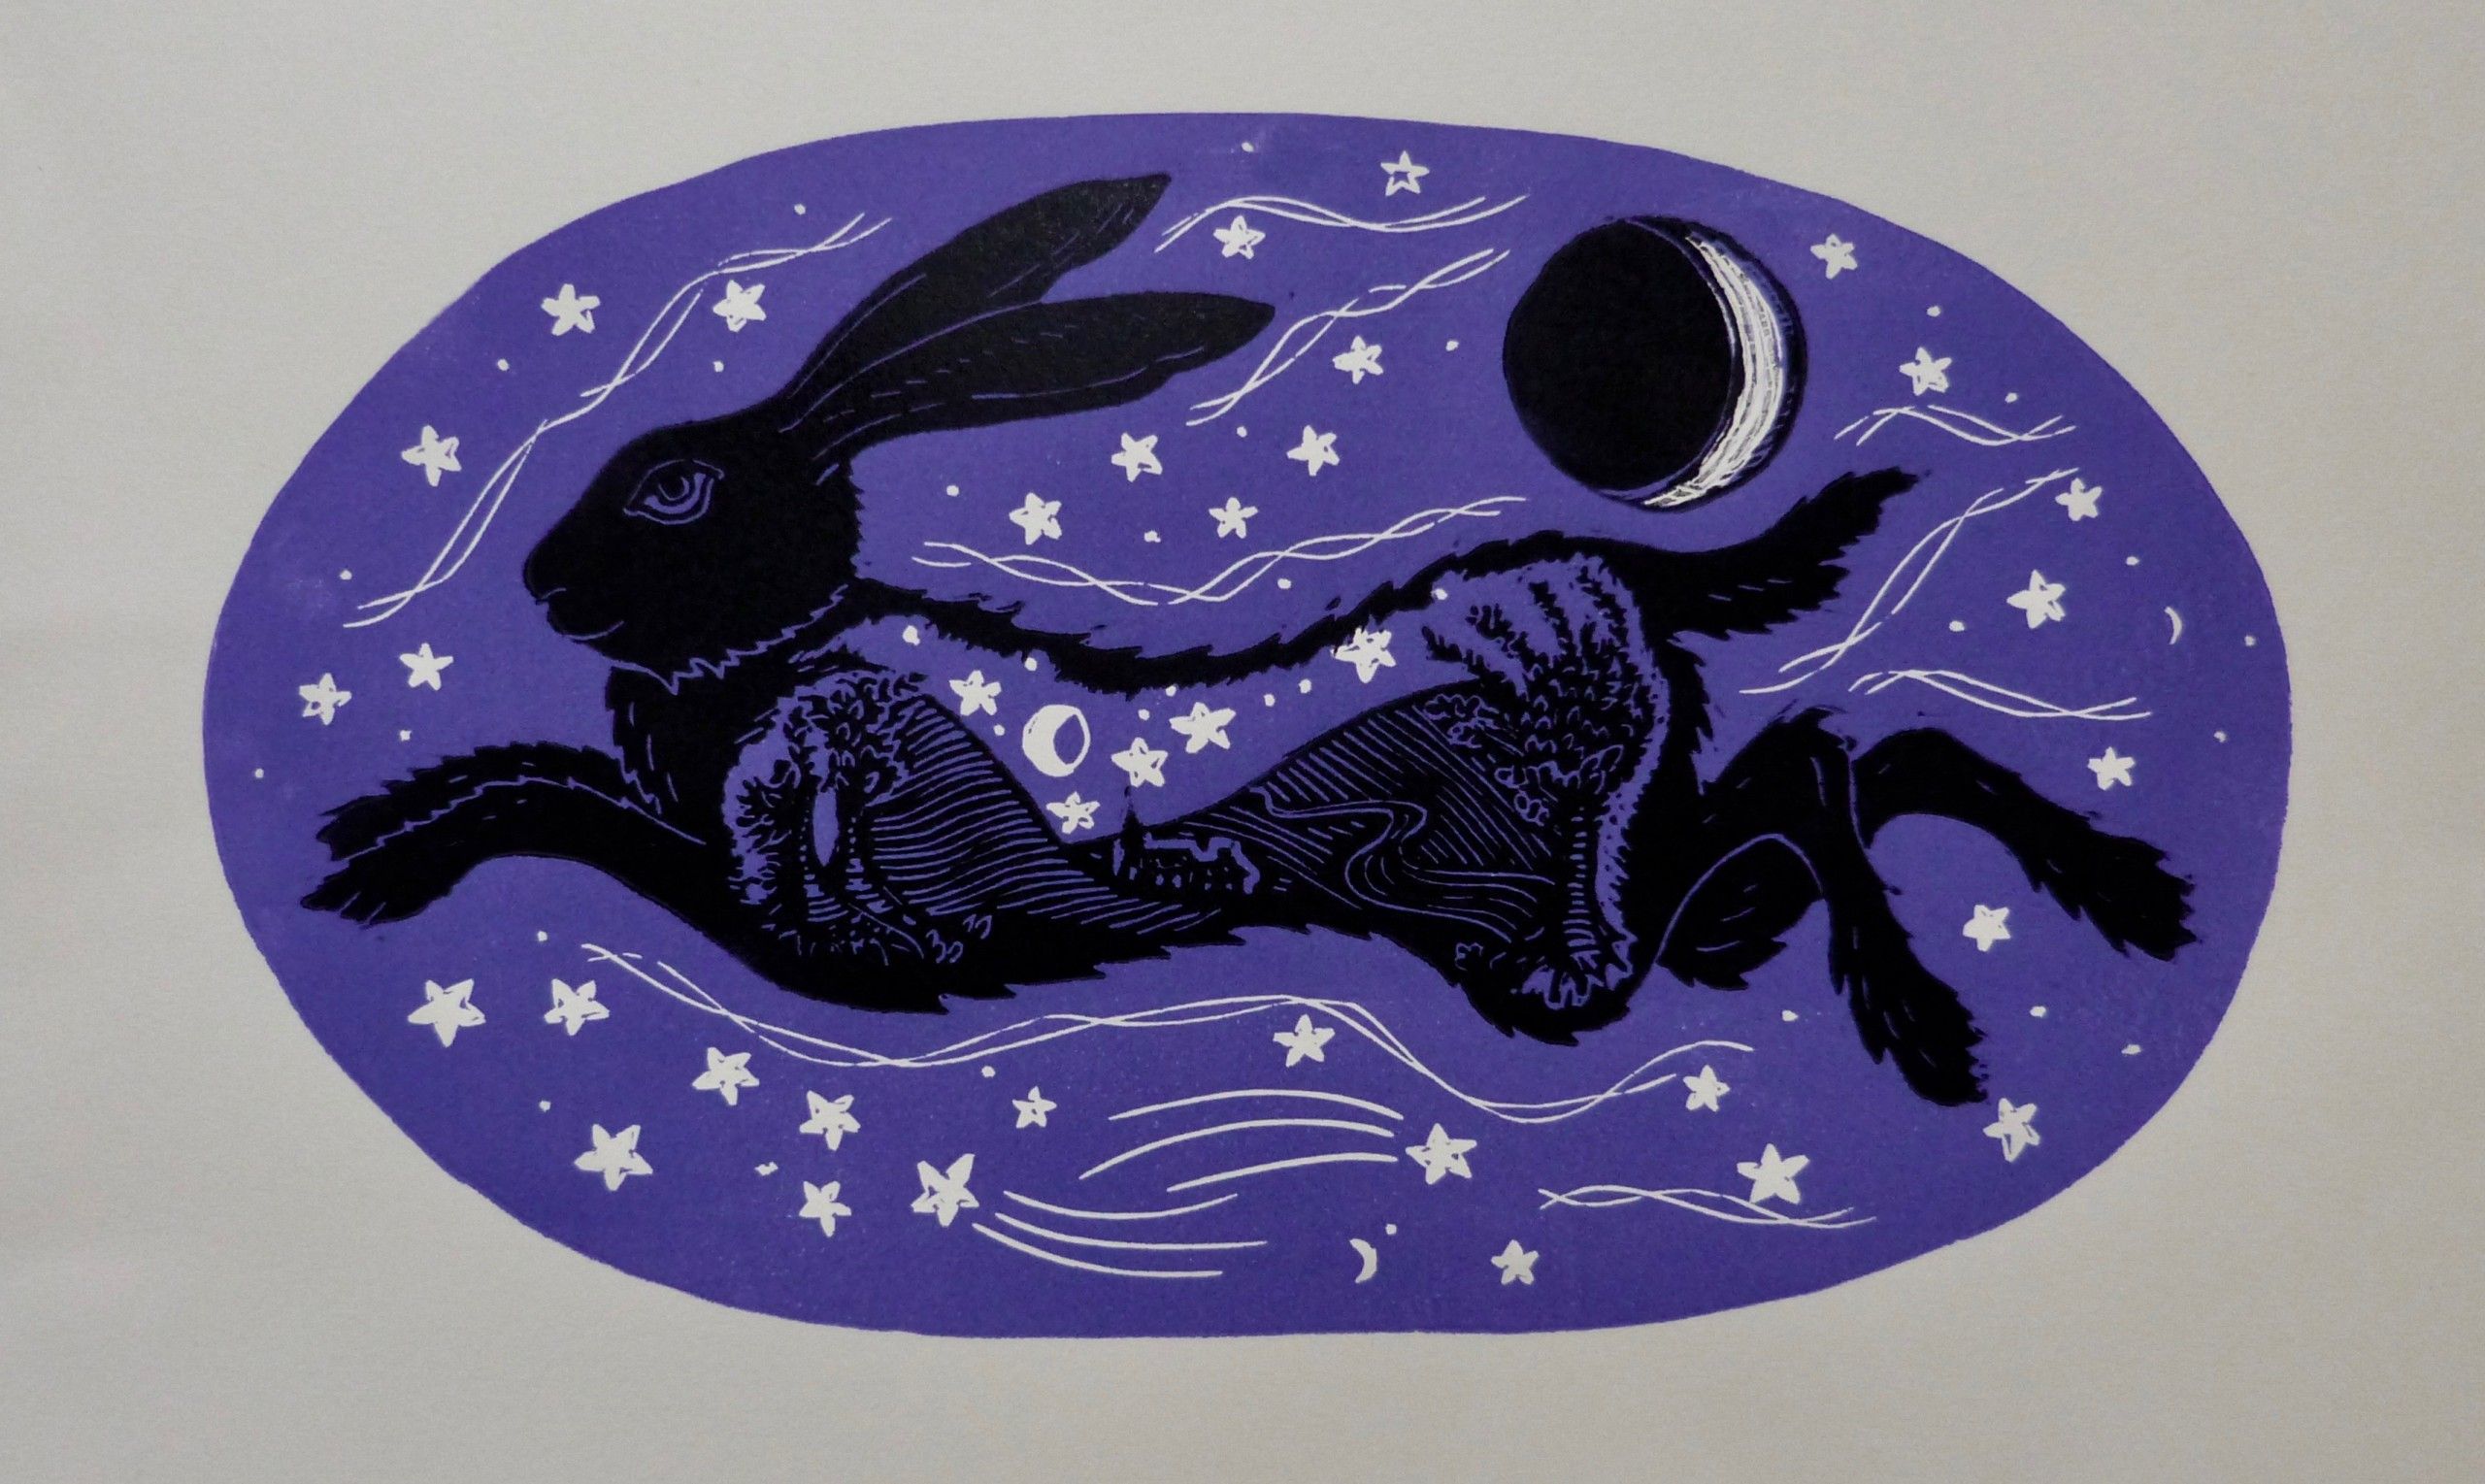 Leaping Hare by Kate Willows